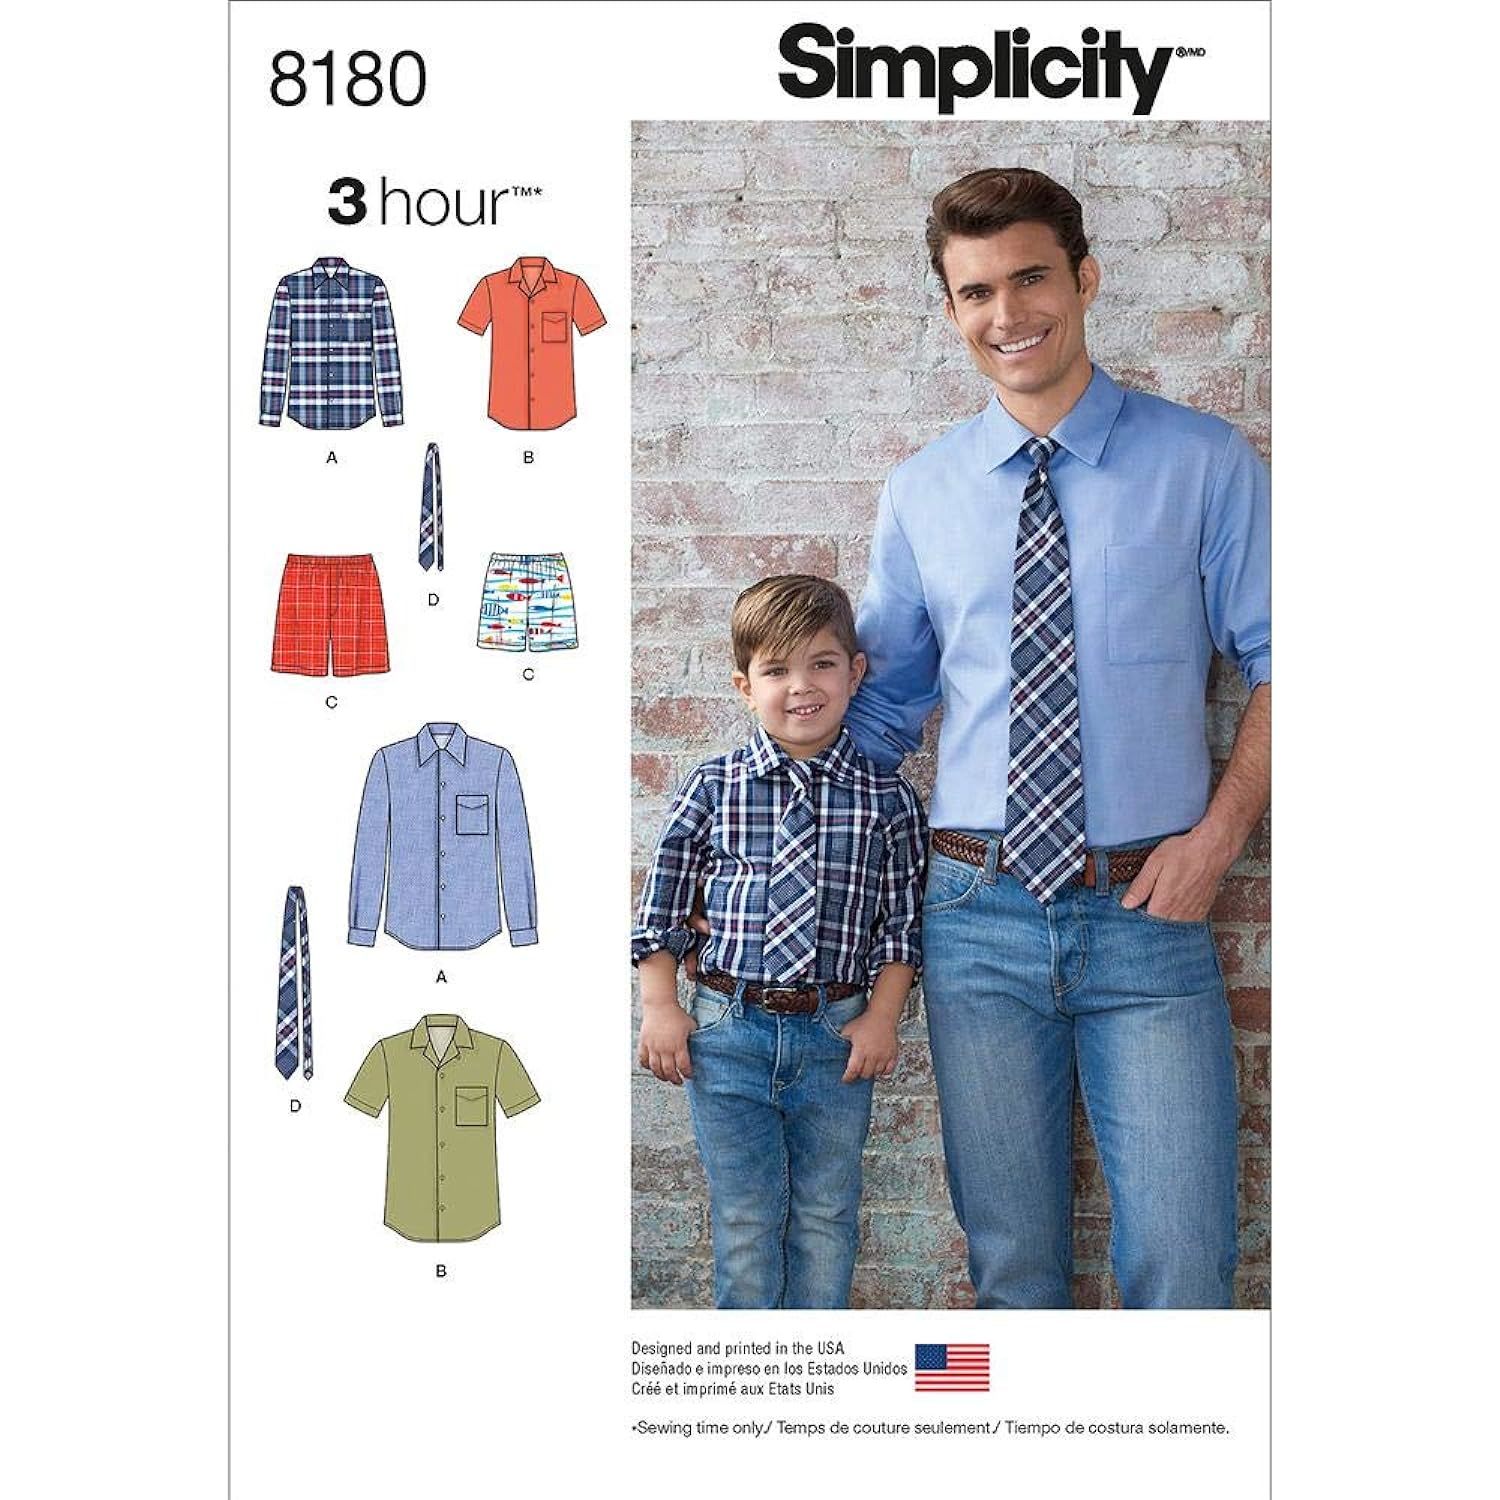 Primary image for Simplicity 8180 Men and Boy's Shirt, Boxer Short, and Tie Sewing Pattern by 3 Ho